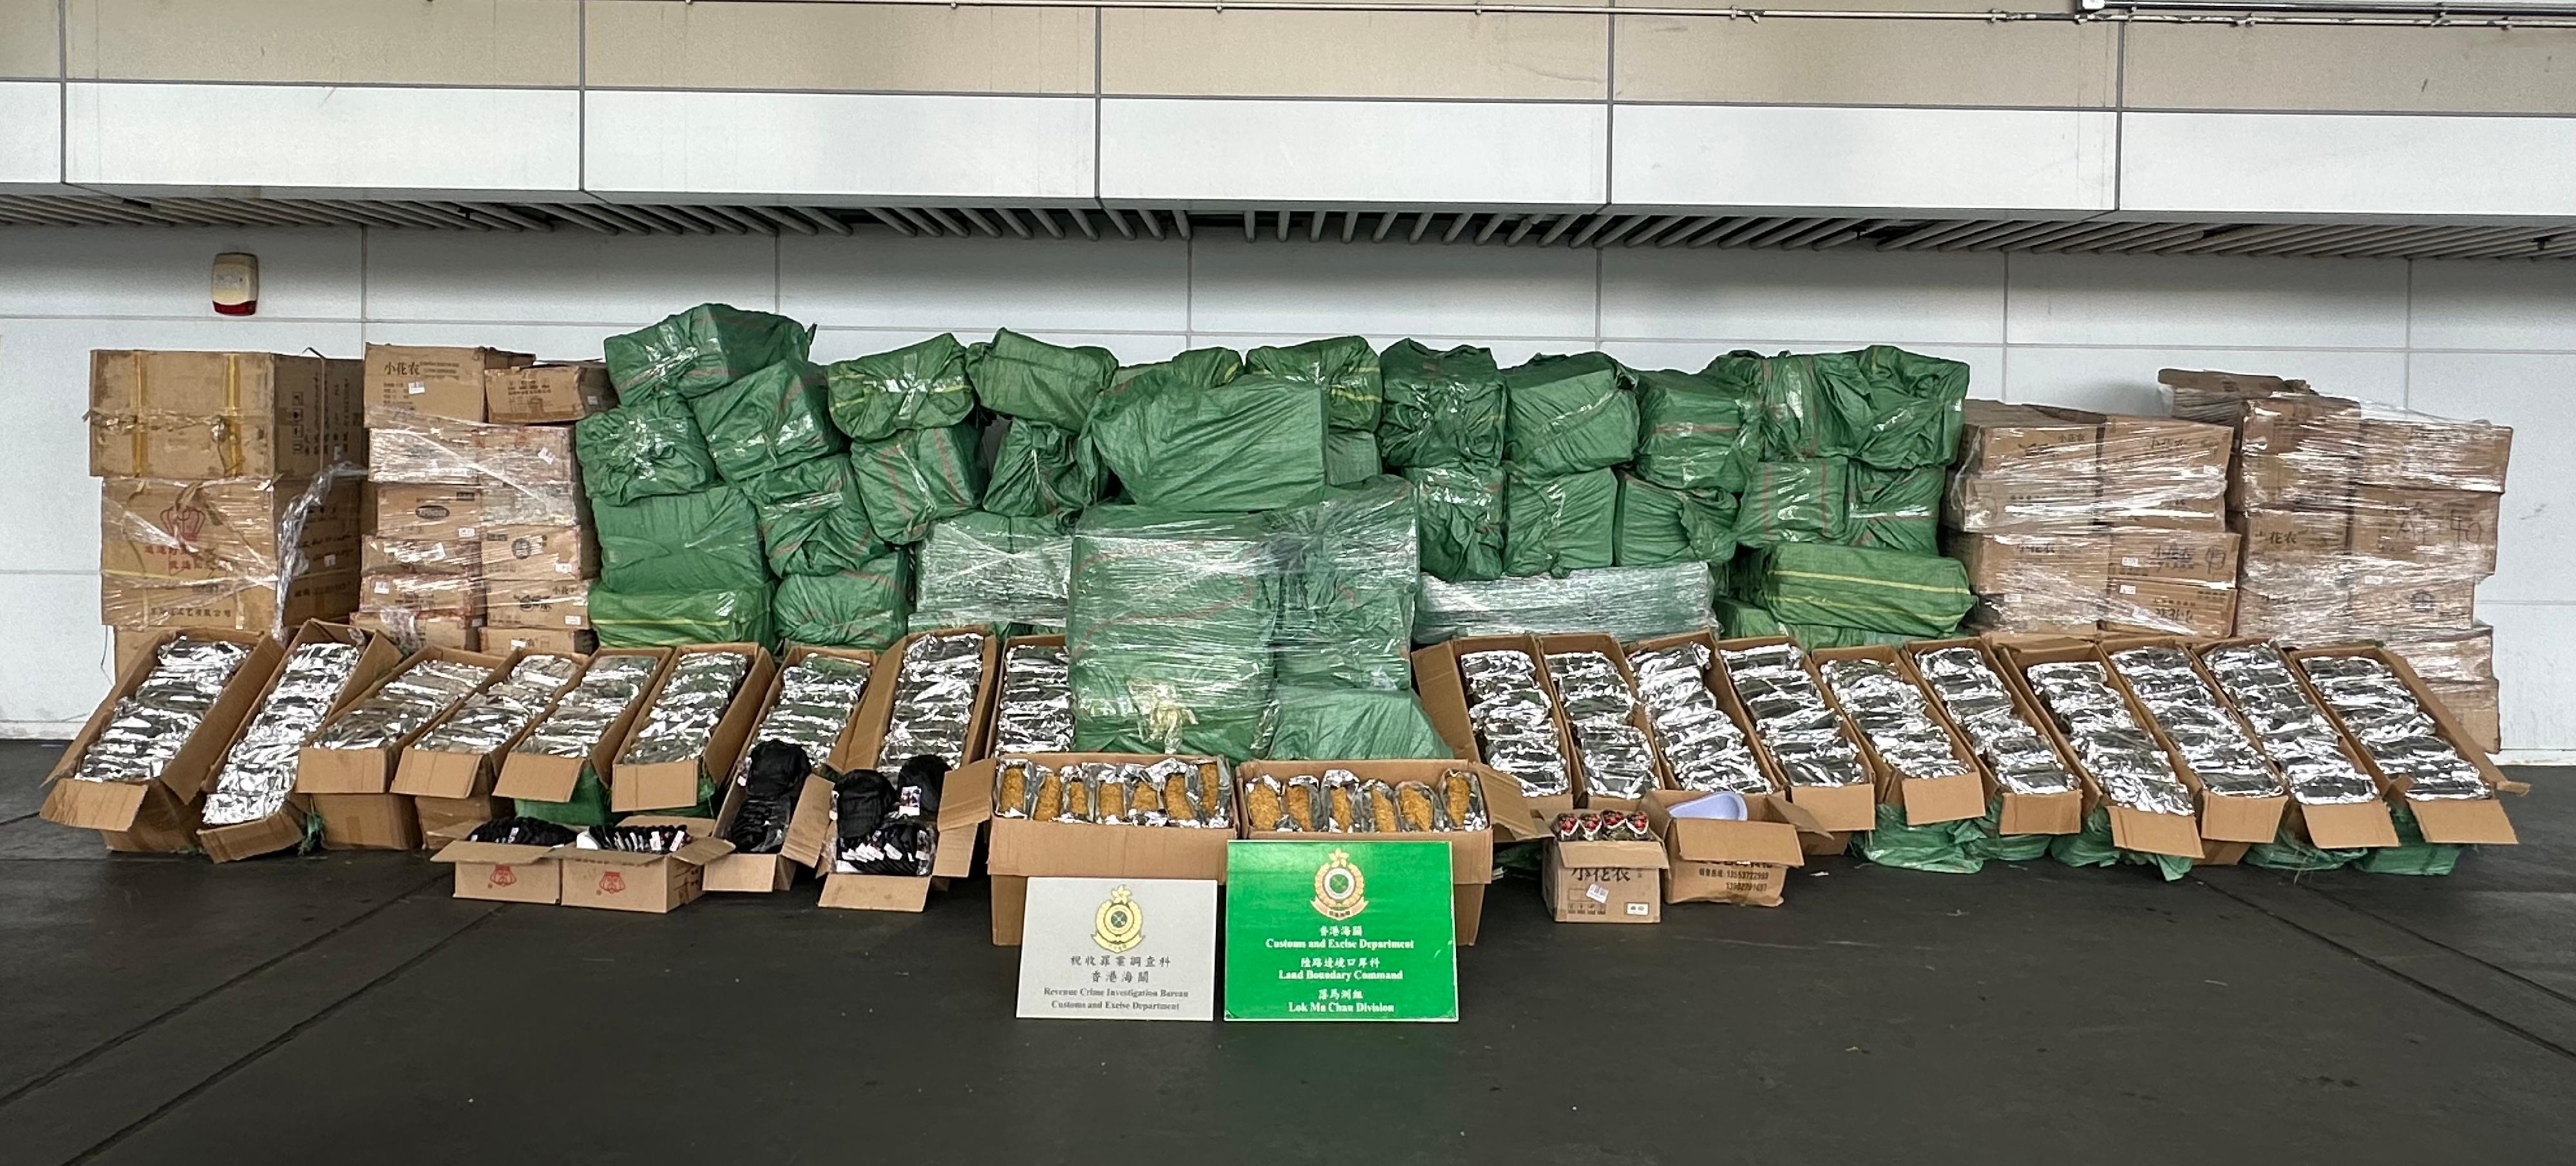 Hong Kong Customs today (September 23) detected a large-scale duty-not-paid manufactured tobacco smuggling case at the Lok Ma Chau Control Point and seized about 3 100 kilograms of suspected duty-not-paid manufactured tobacco with an estimated market value of about $16 million and a duty potential of about $9.5 million. Photo shows the suspected duty-not-paid cigarettes seized.
